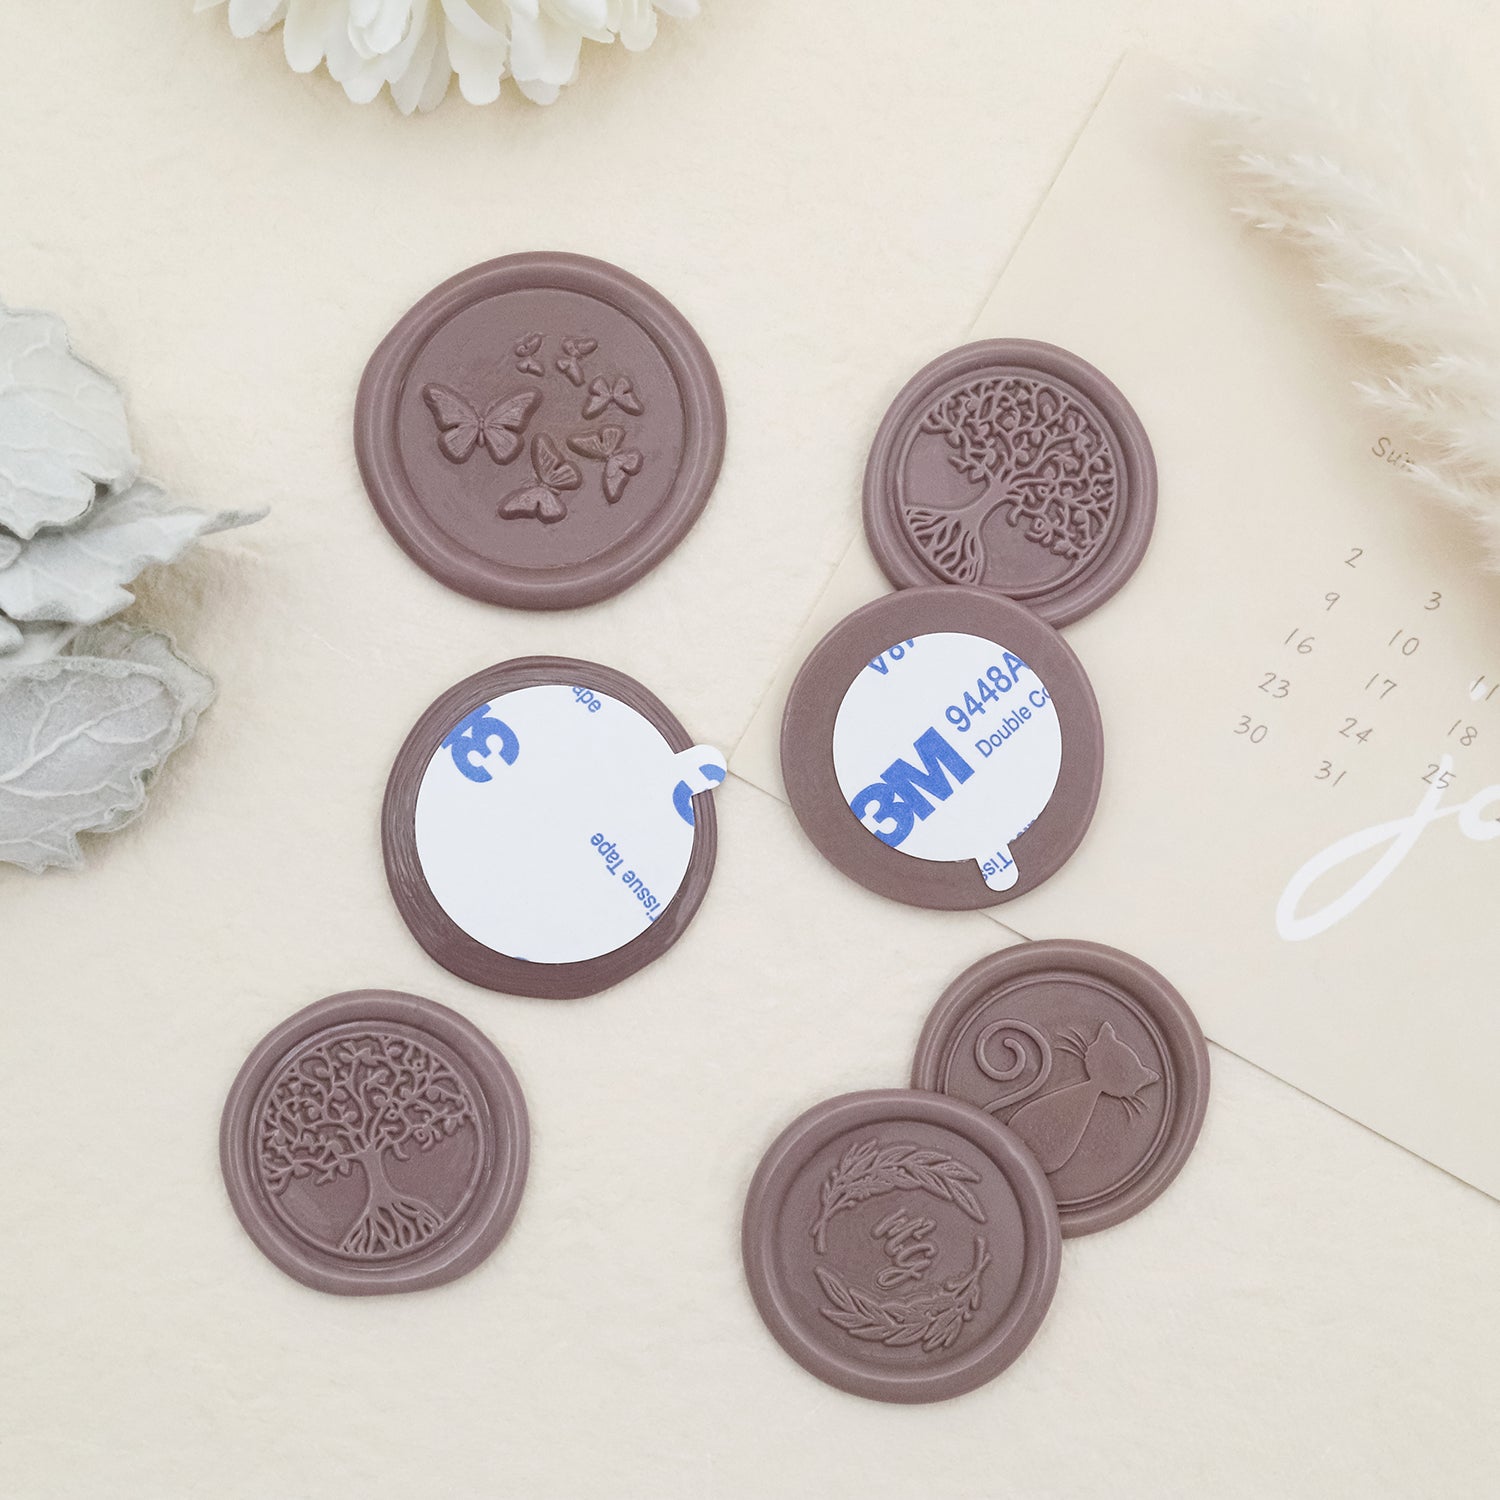 White Leaf design for Peel And Stick Self Adhesive WAX SEAL STICKER Gift  Sealing Wax stickers